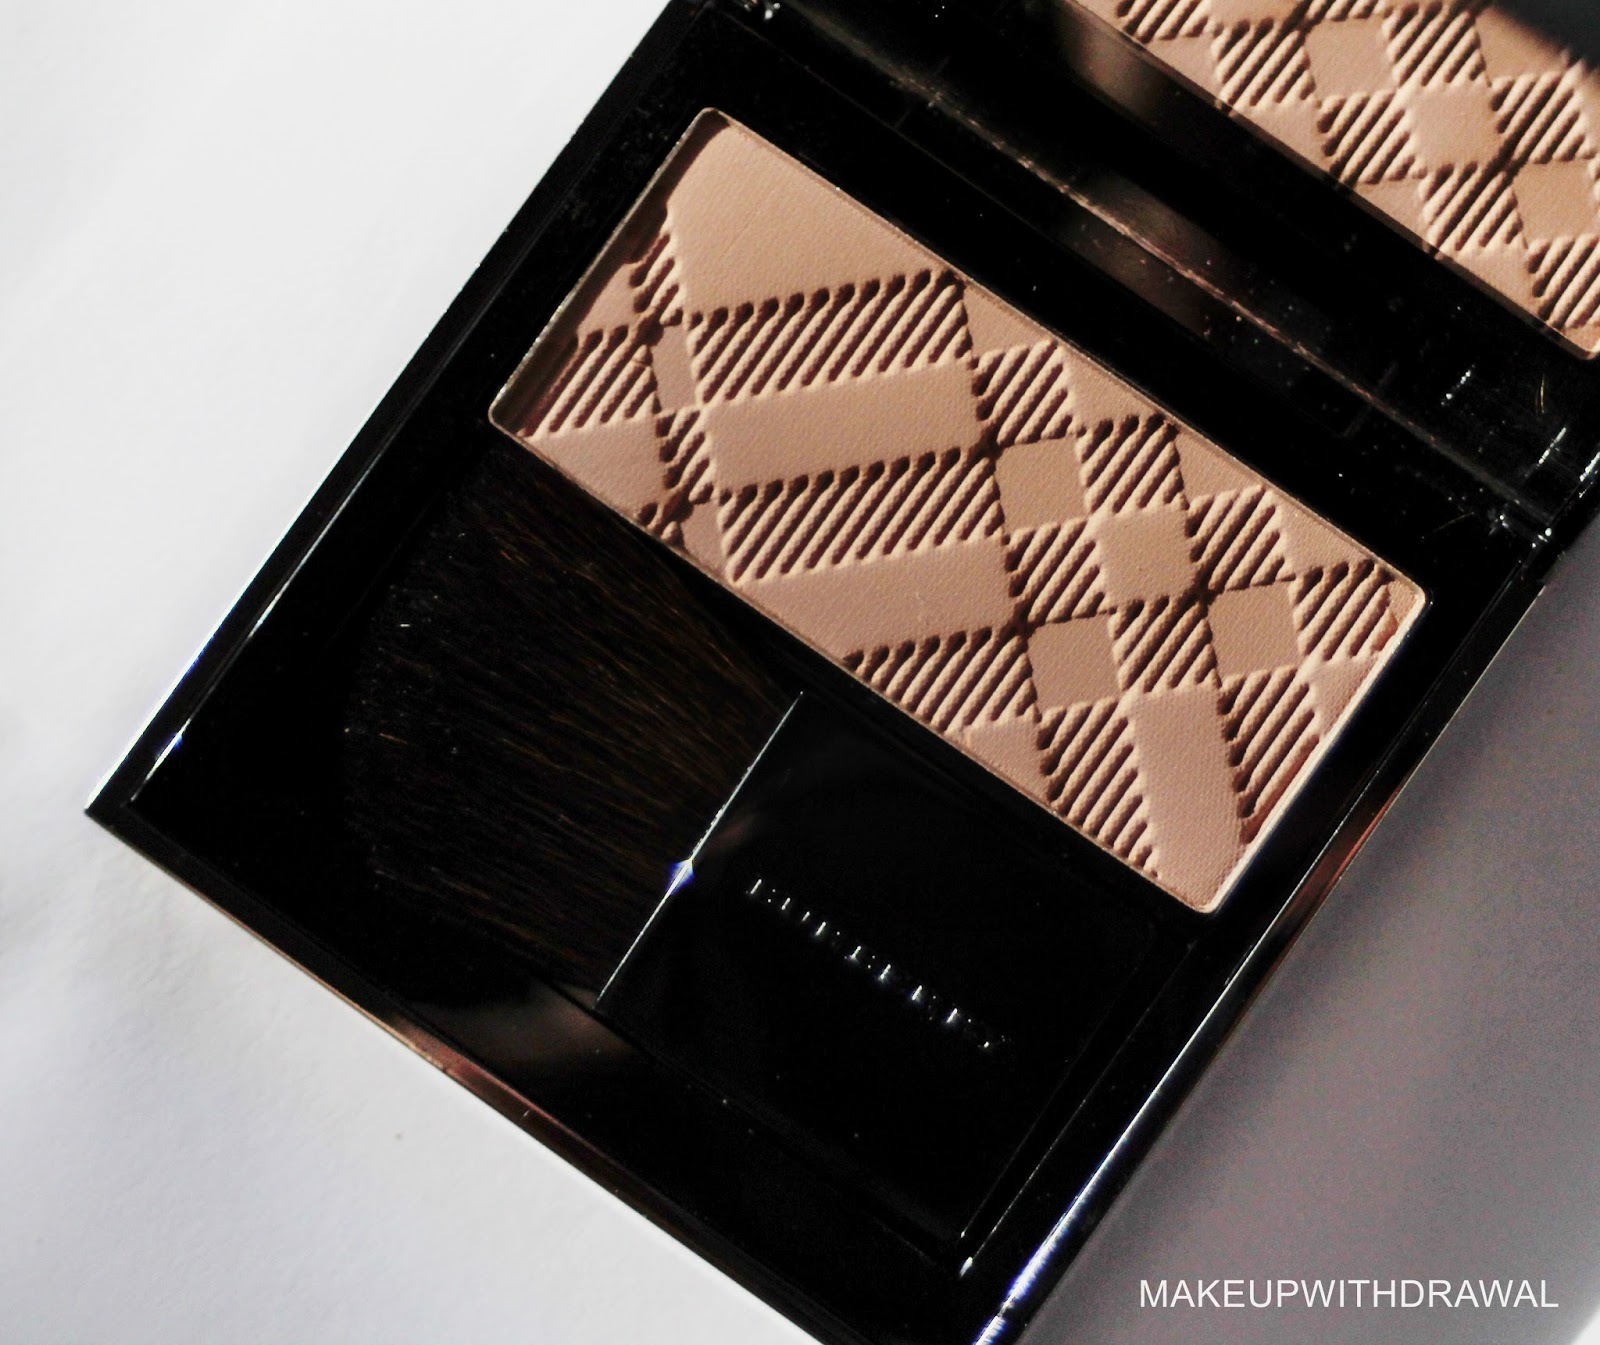 Burberry Light Glow Blush in Earthy 07 | Makeup Withdrawal